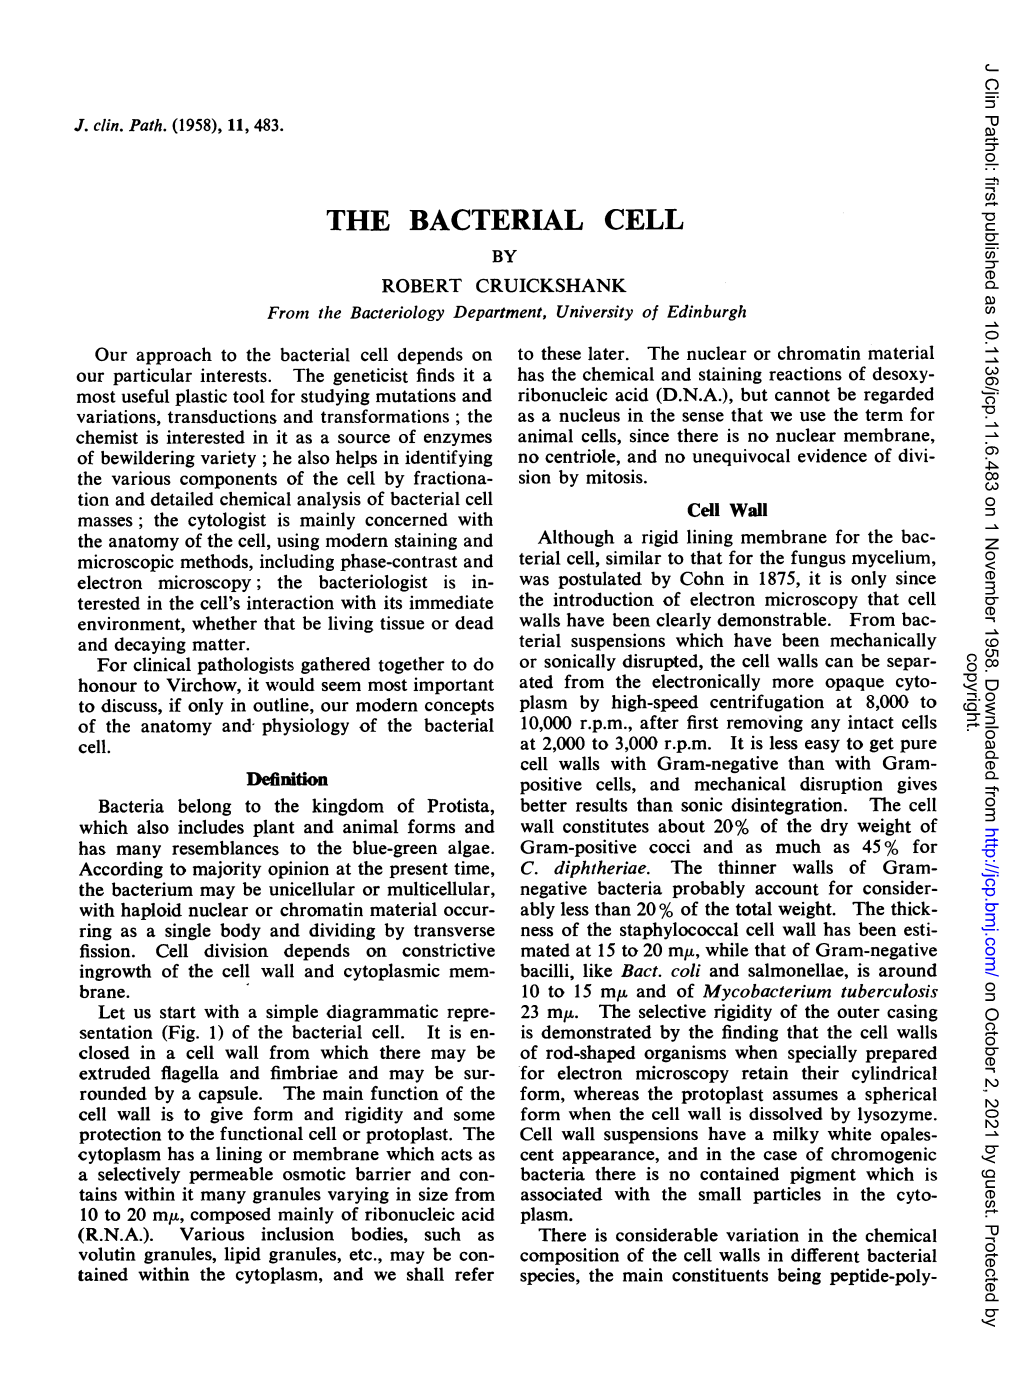 THE BACTERIAL CELL by ROBERT CRUICKSHANK from the Bacteriology Department, University of Edinburgh Our Approach to the Bacterial Cell Depends on to These Later